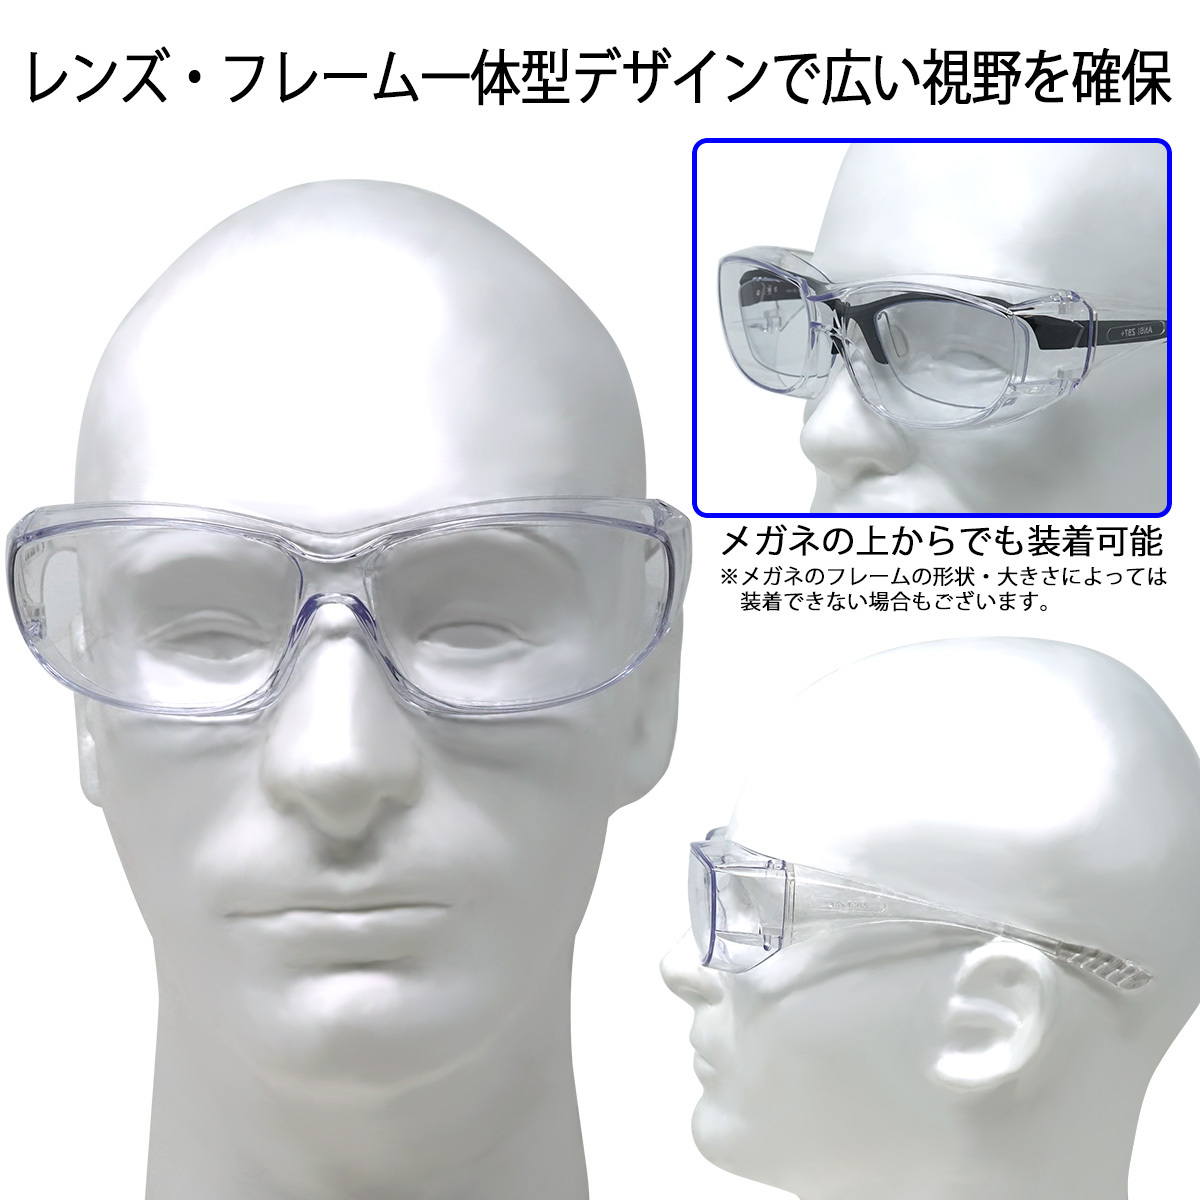  nursing medical care site . spray prevention cloudiness . not protection glasses glasses. on possible to use over glass type goggle pollen glasses tkh ymt